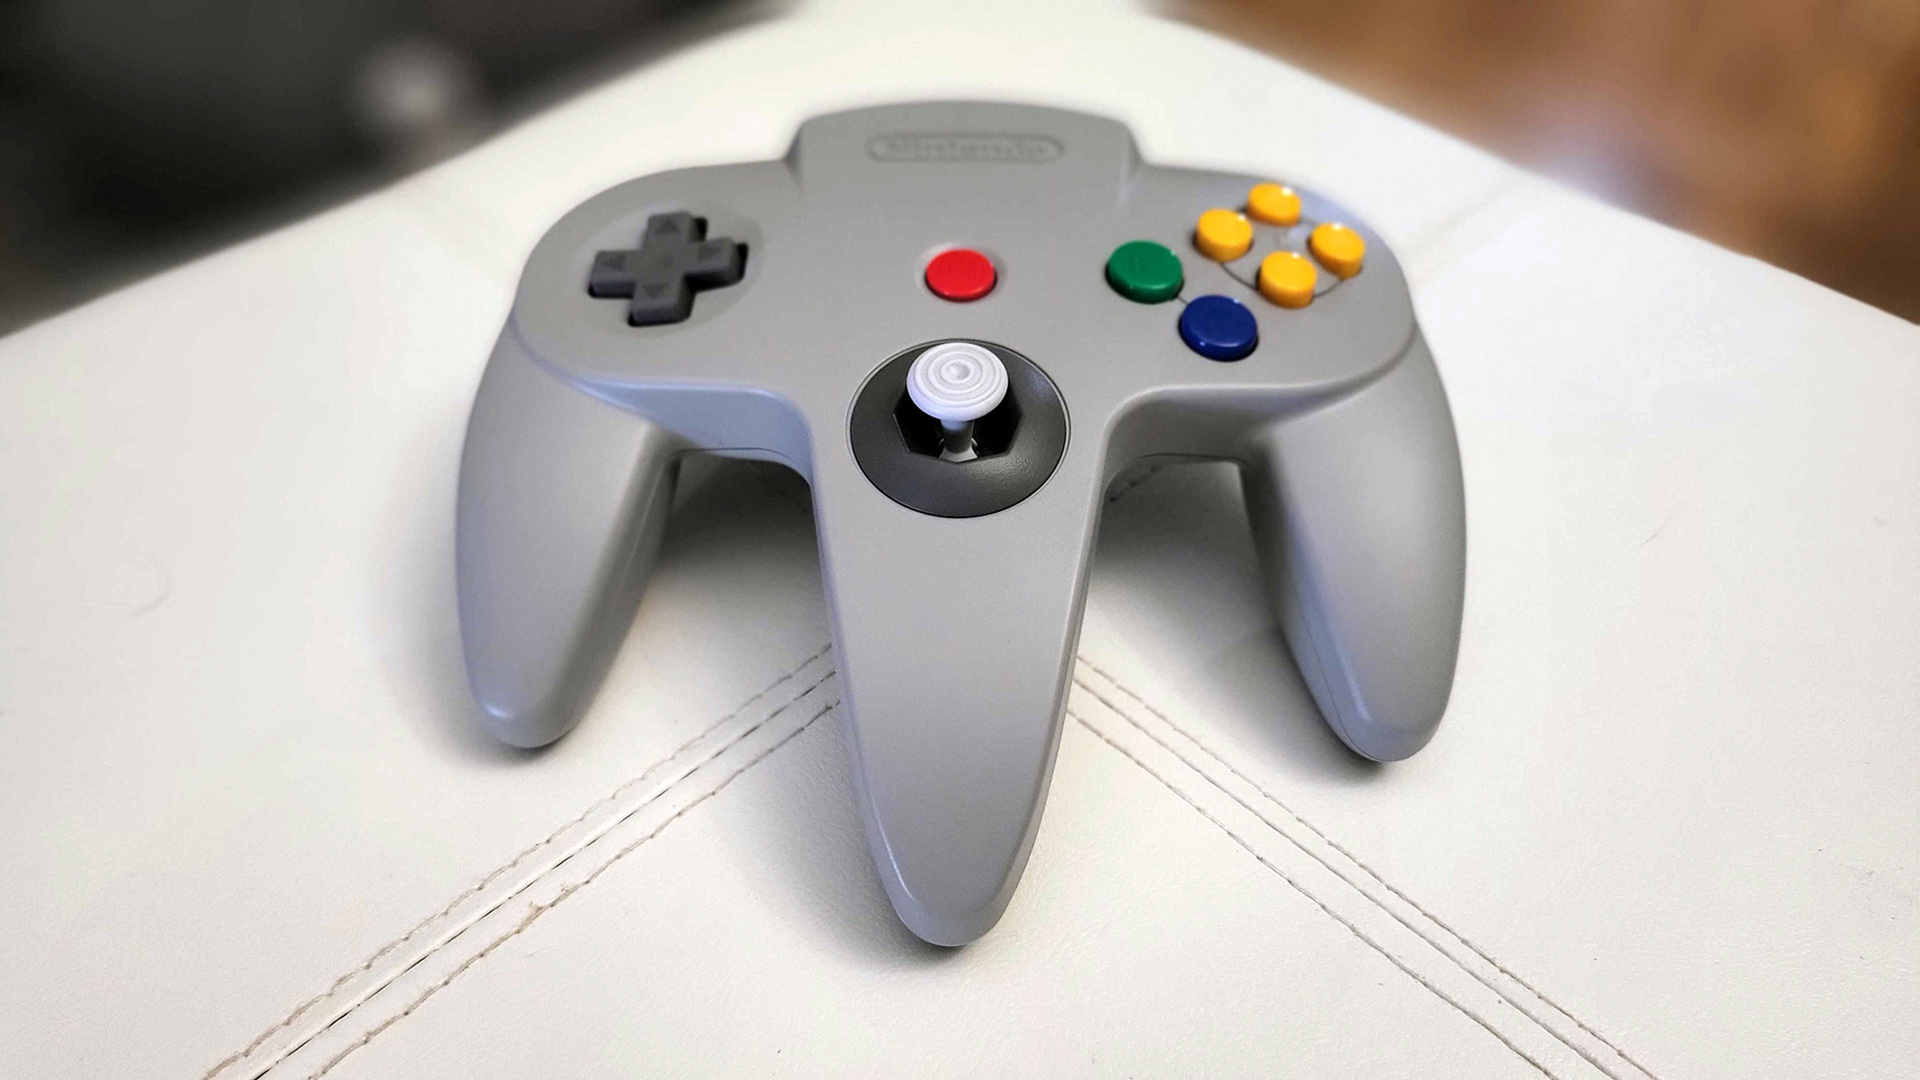 Wind laser plug Nintendo 64 controller for Switch reportedly out of stock, won't be back  until 2022 | TechRadar